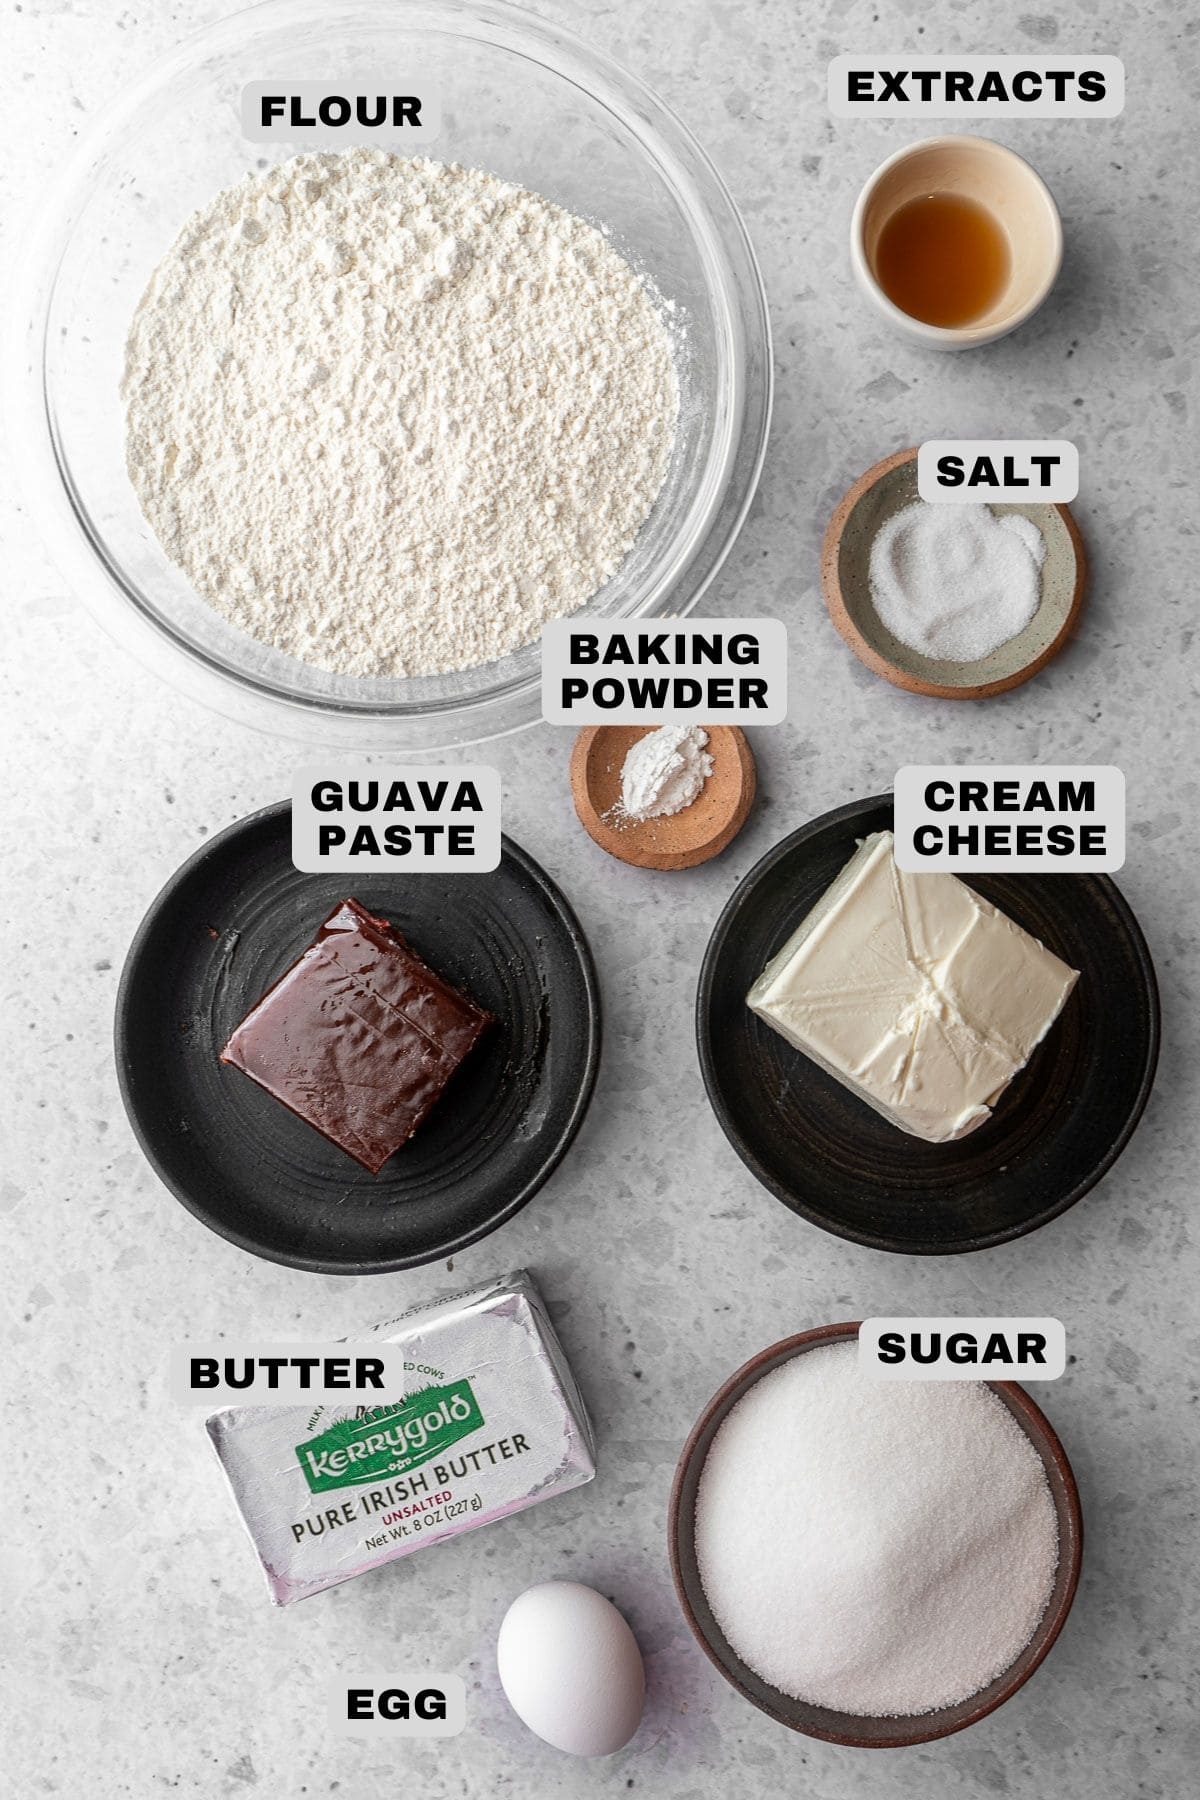 Flour, extracts, salt, baking powder, guava paste, cream cheese, sugar, butter, egg ingredients with labels.